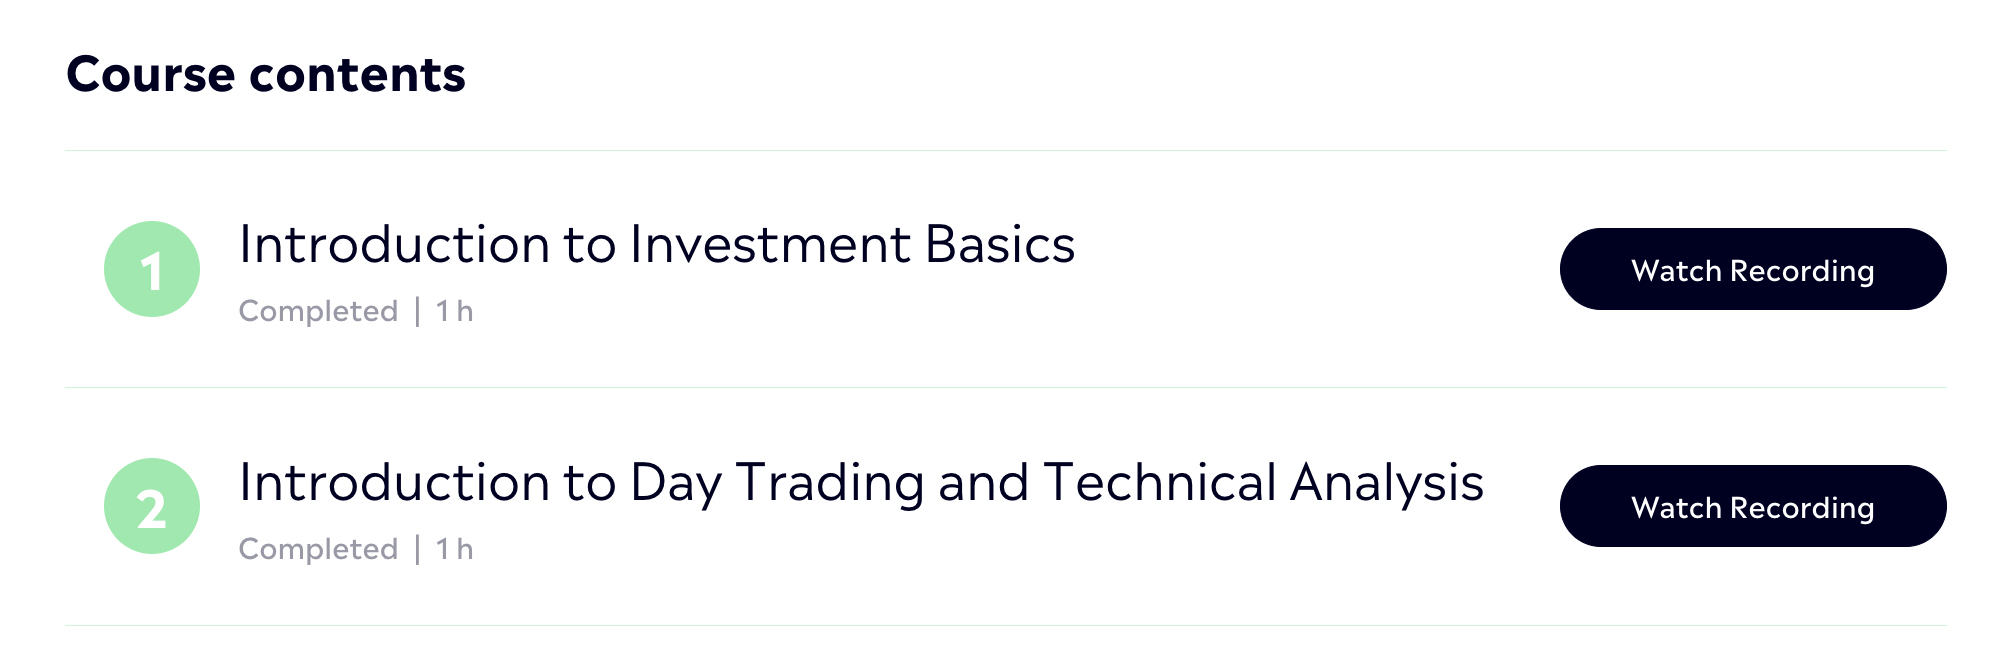 Education courses completed on eToro Academy